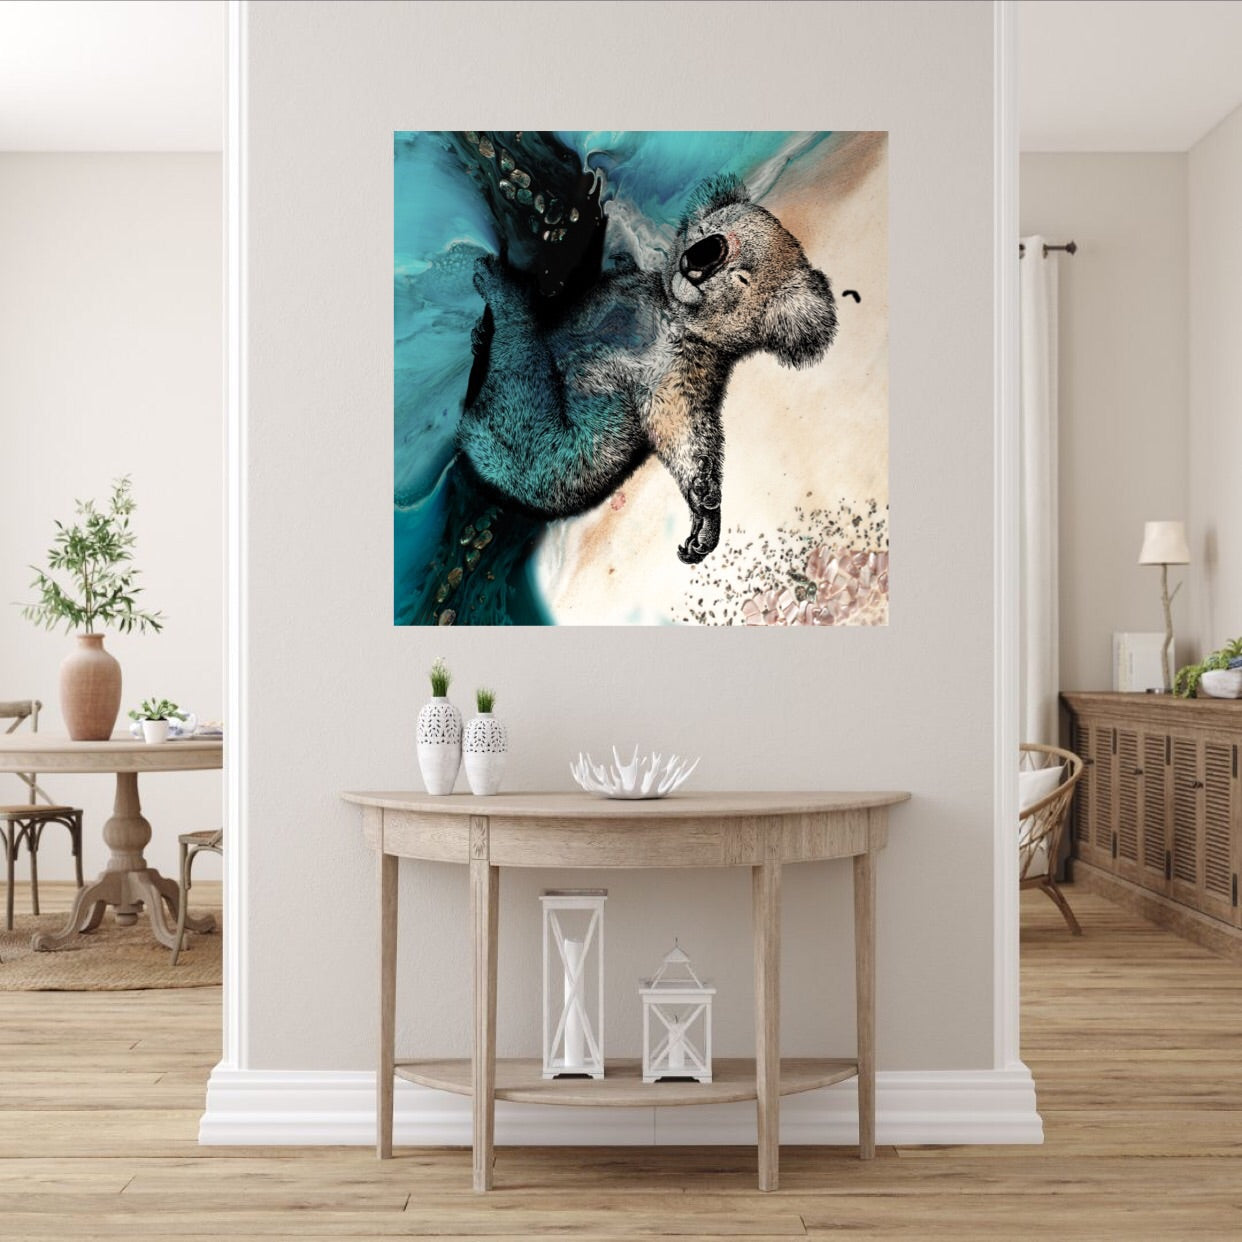 Abstract Seascape. Teal seascape with Koala. Art Print. Antuanelle 3 Sleeping Beauty. Print for WIRES Wildlife Rescue. Limited Edition